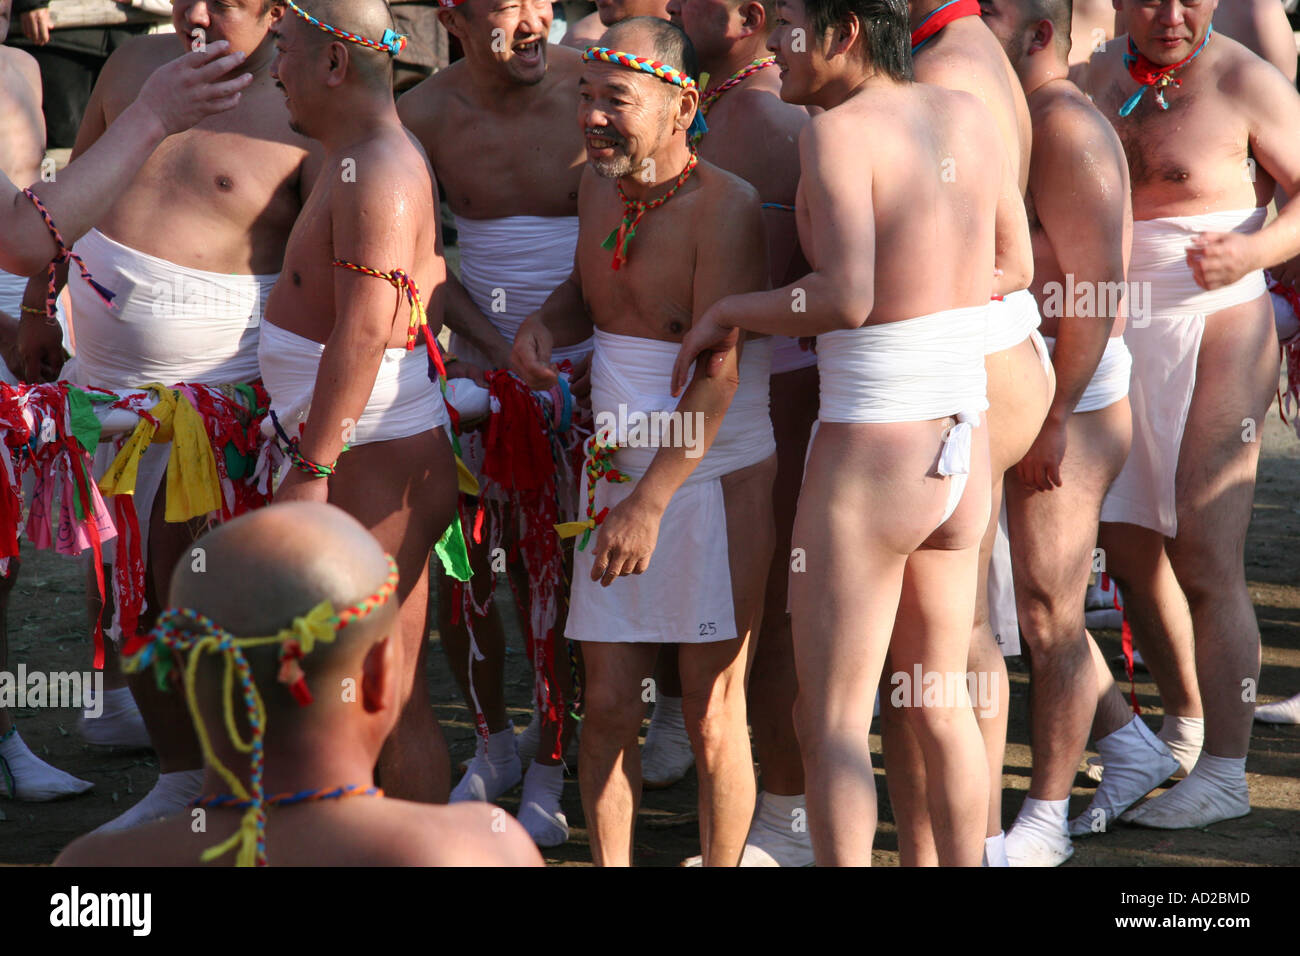 Men at a 'naked' festival in central Japan Stock Photo - Alamy